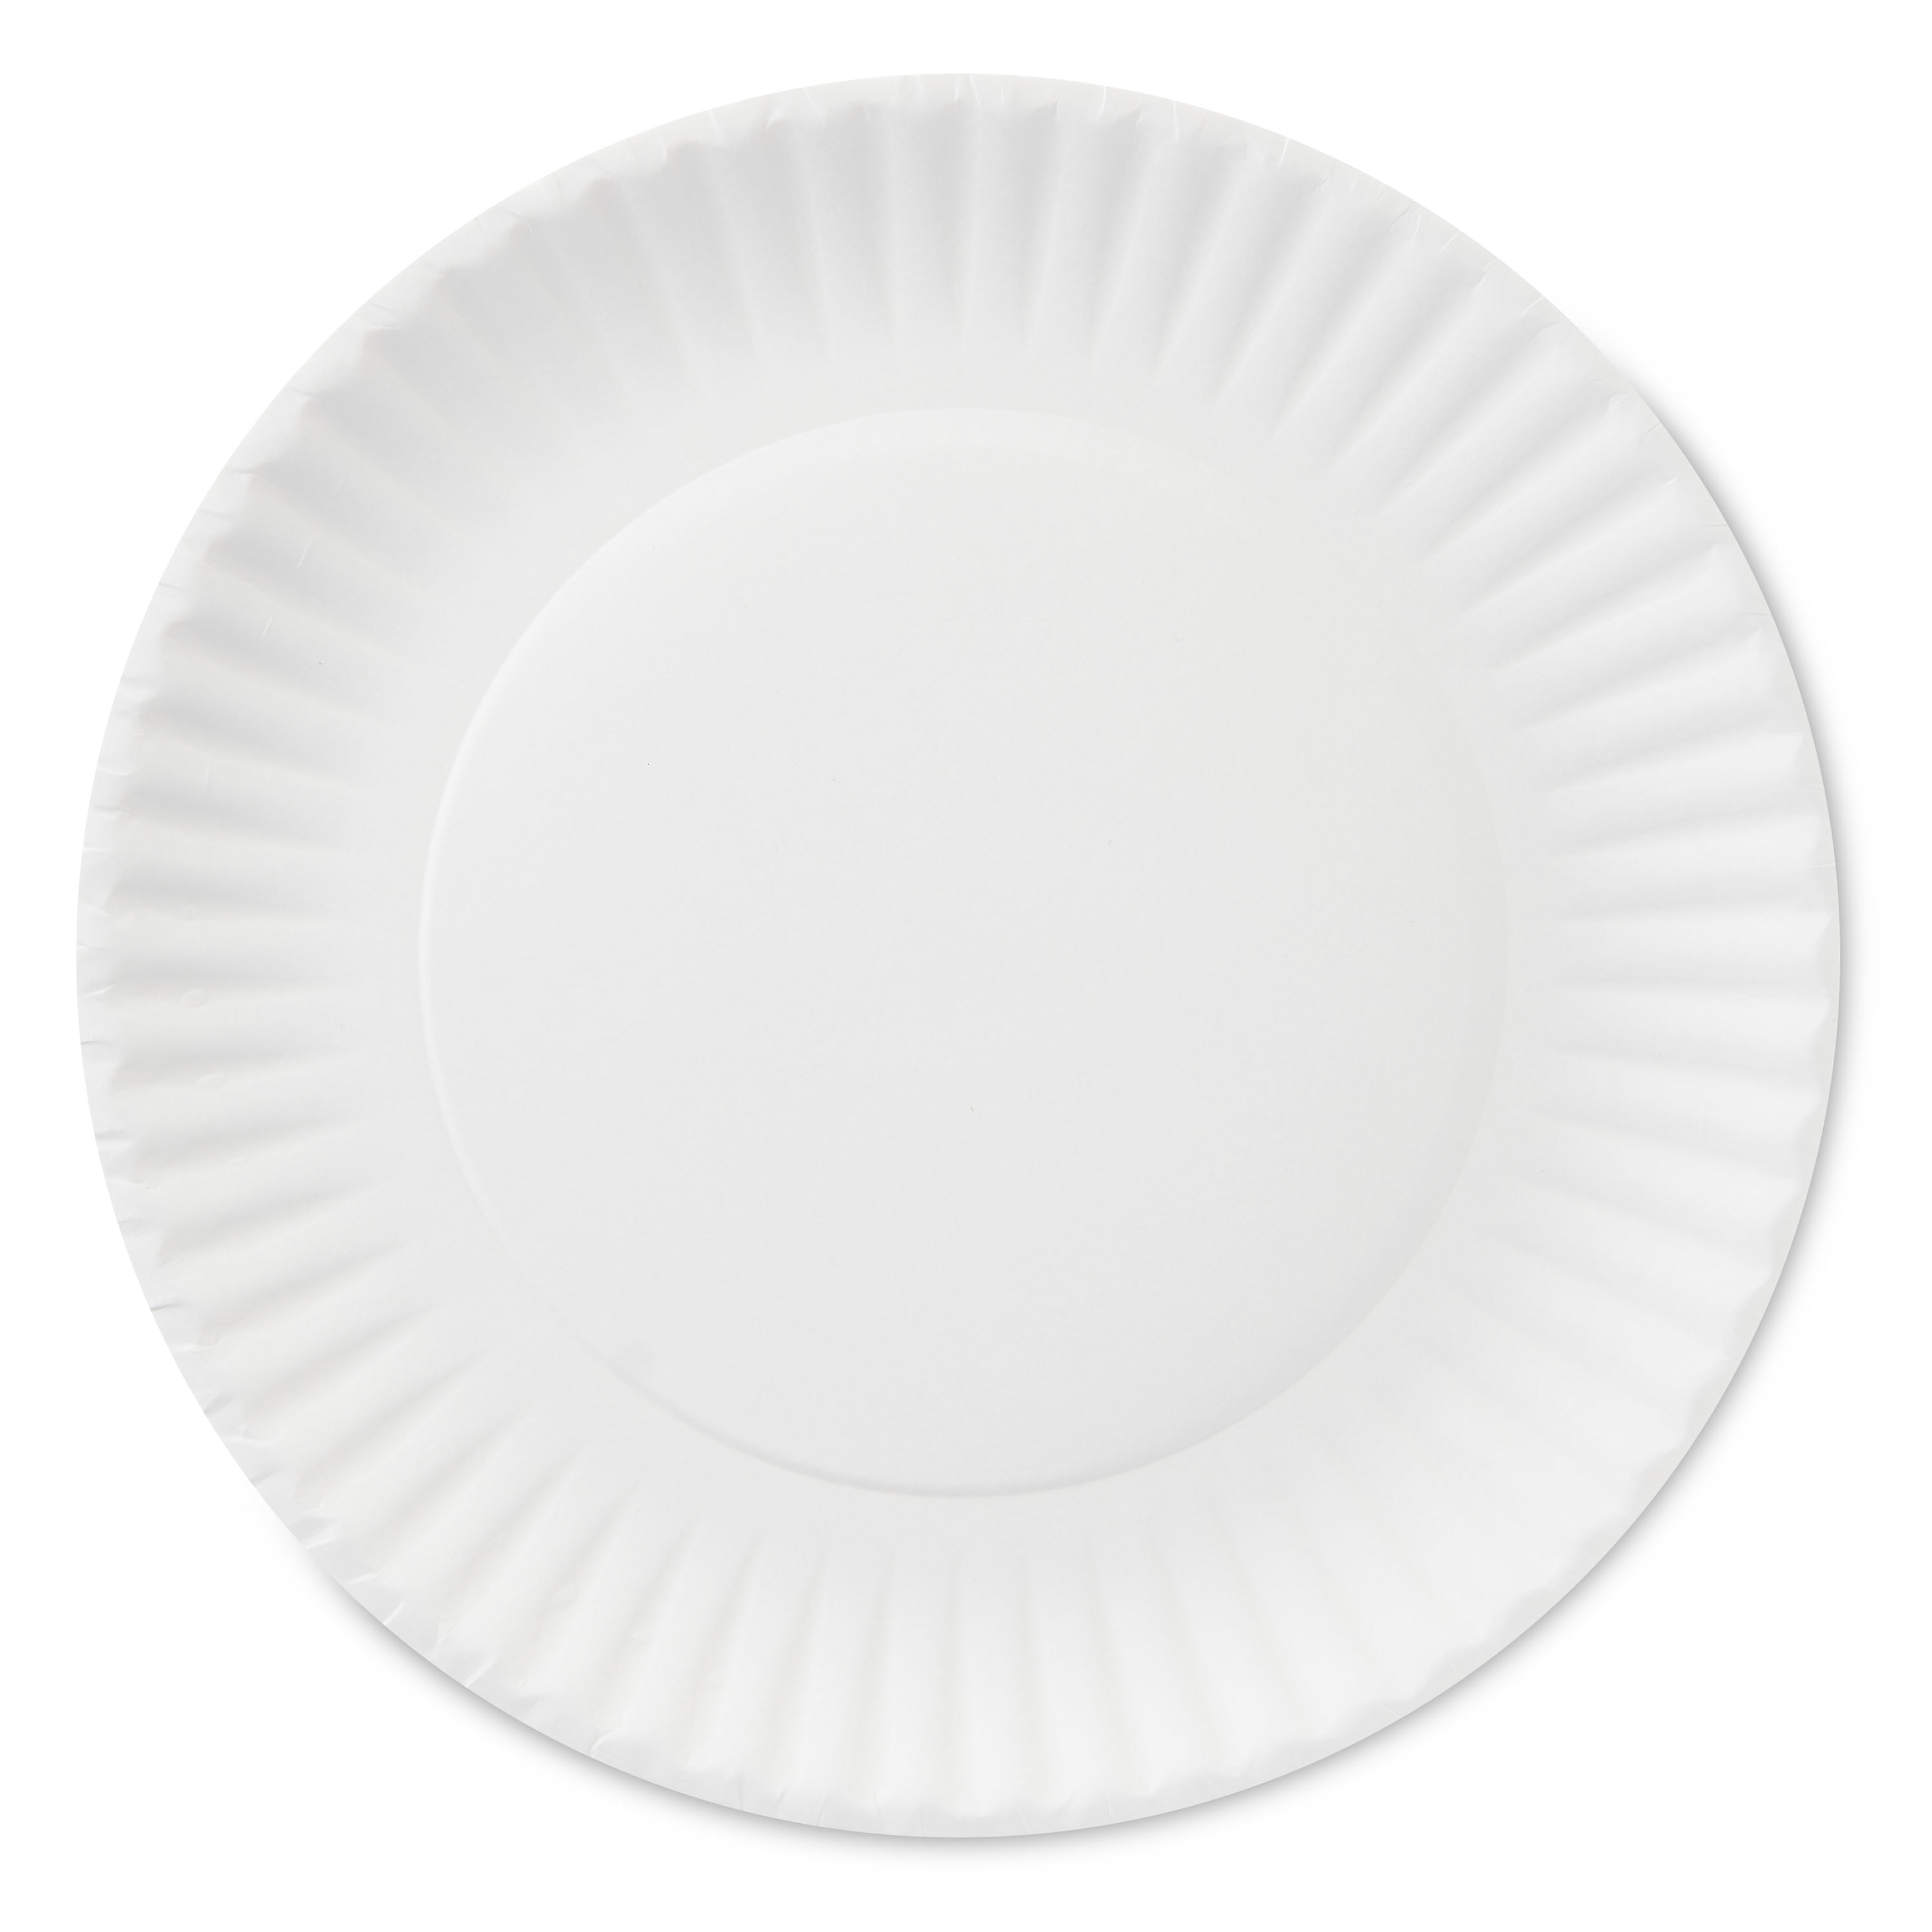 Great Value Uncoated, Microwave Safe, Disposable Paper Plates, 9, White,  100 Count